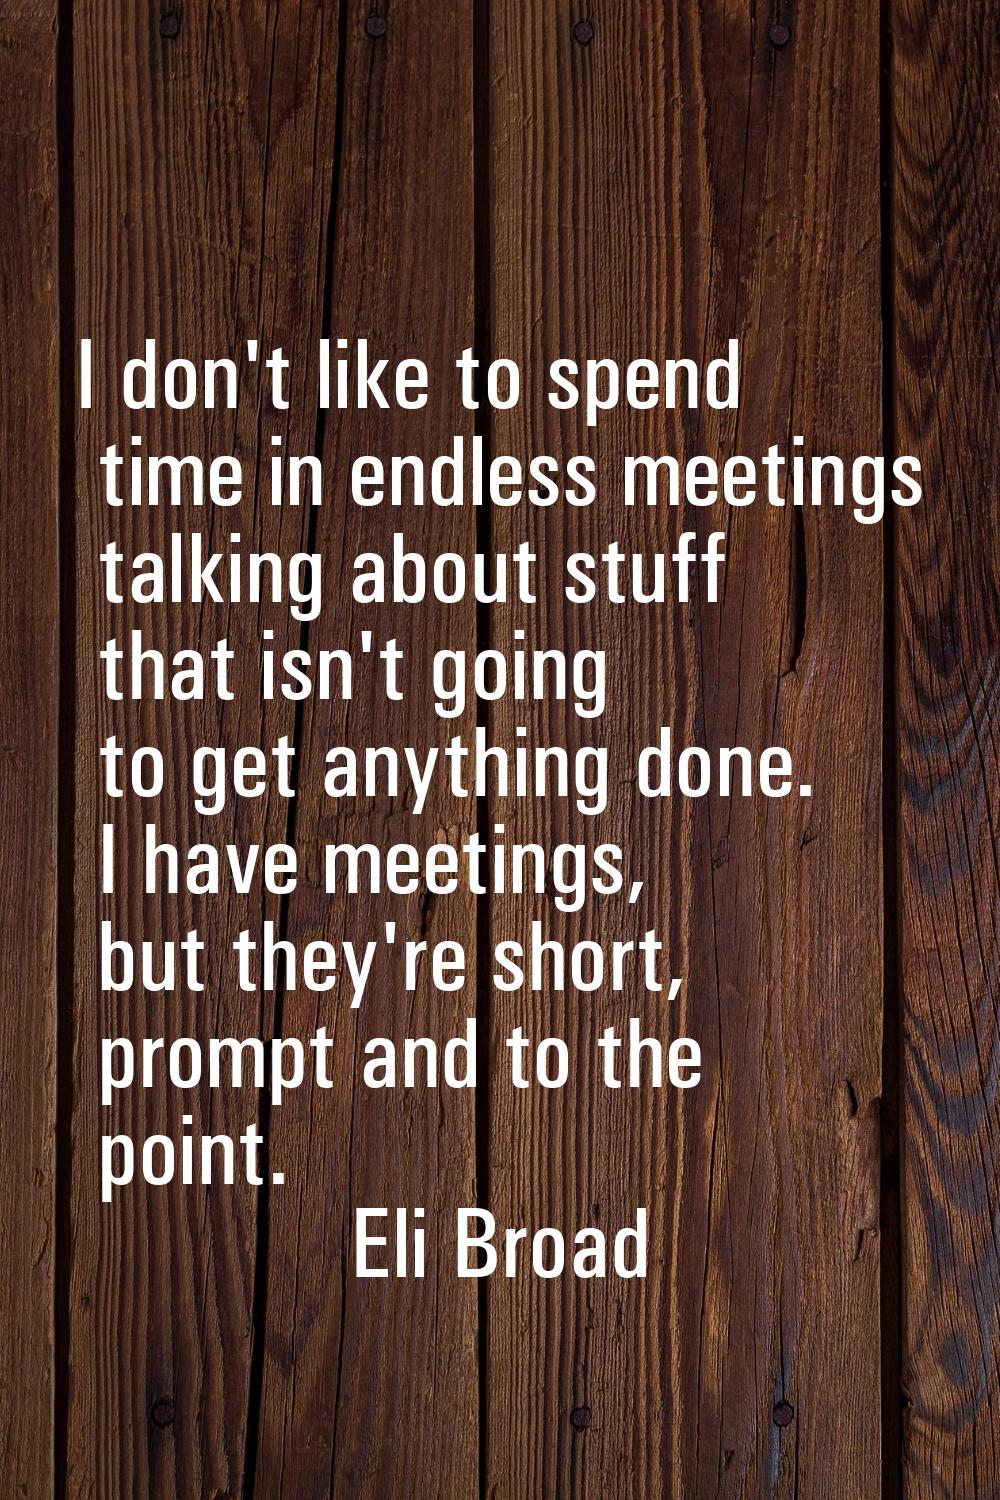 I don't like to spend time in endless meetings talking about stuff that isn't going to get anything